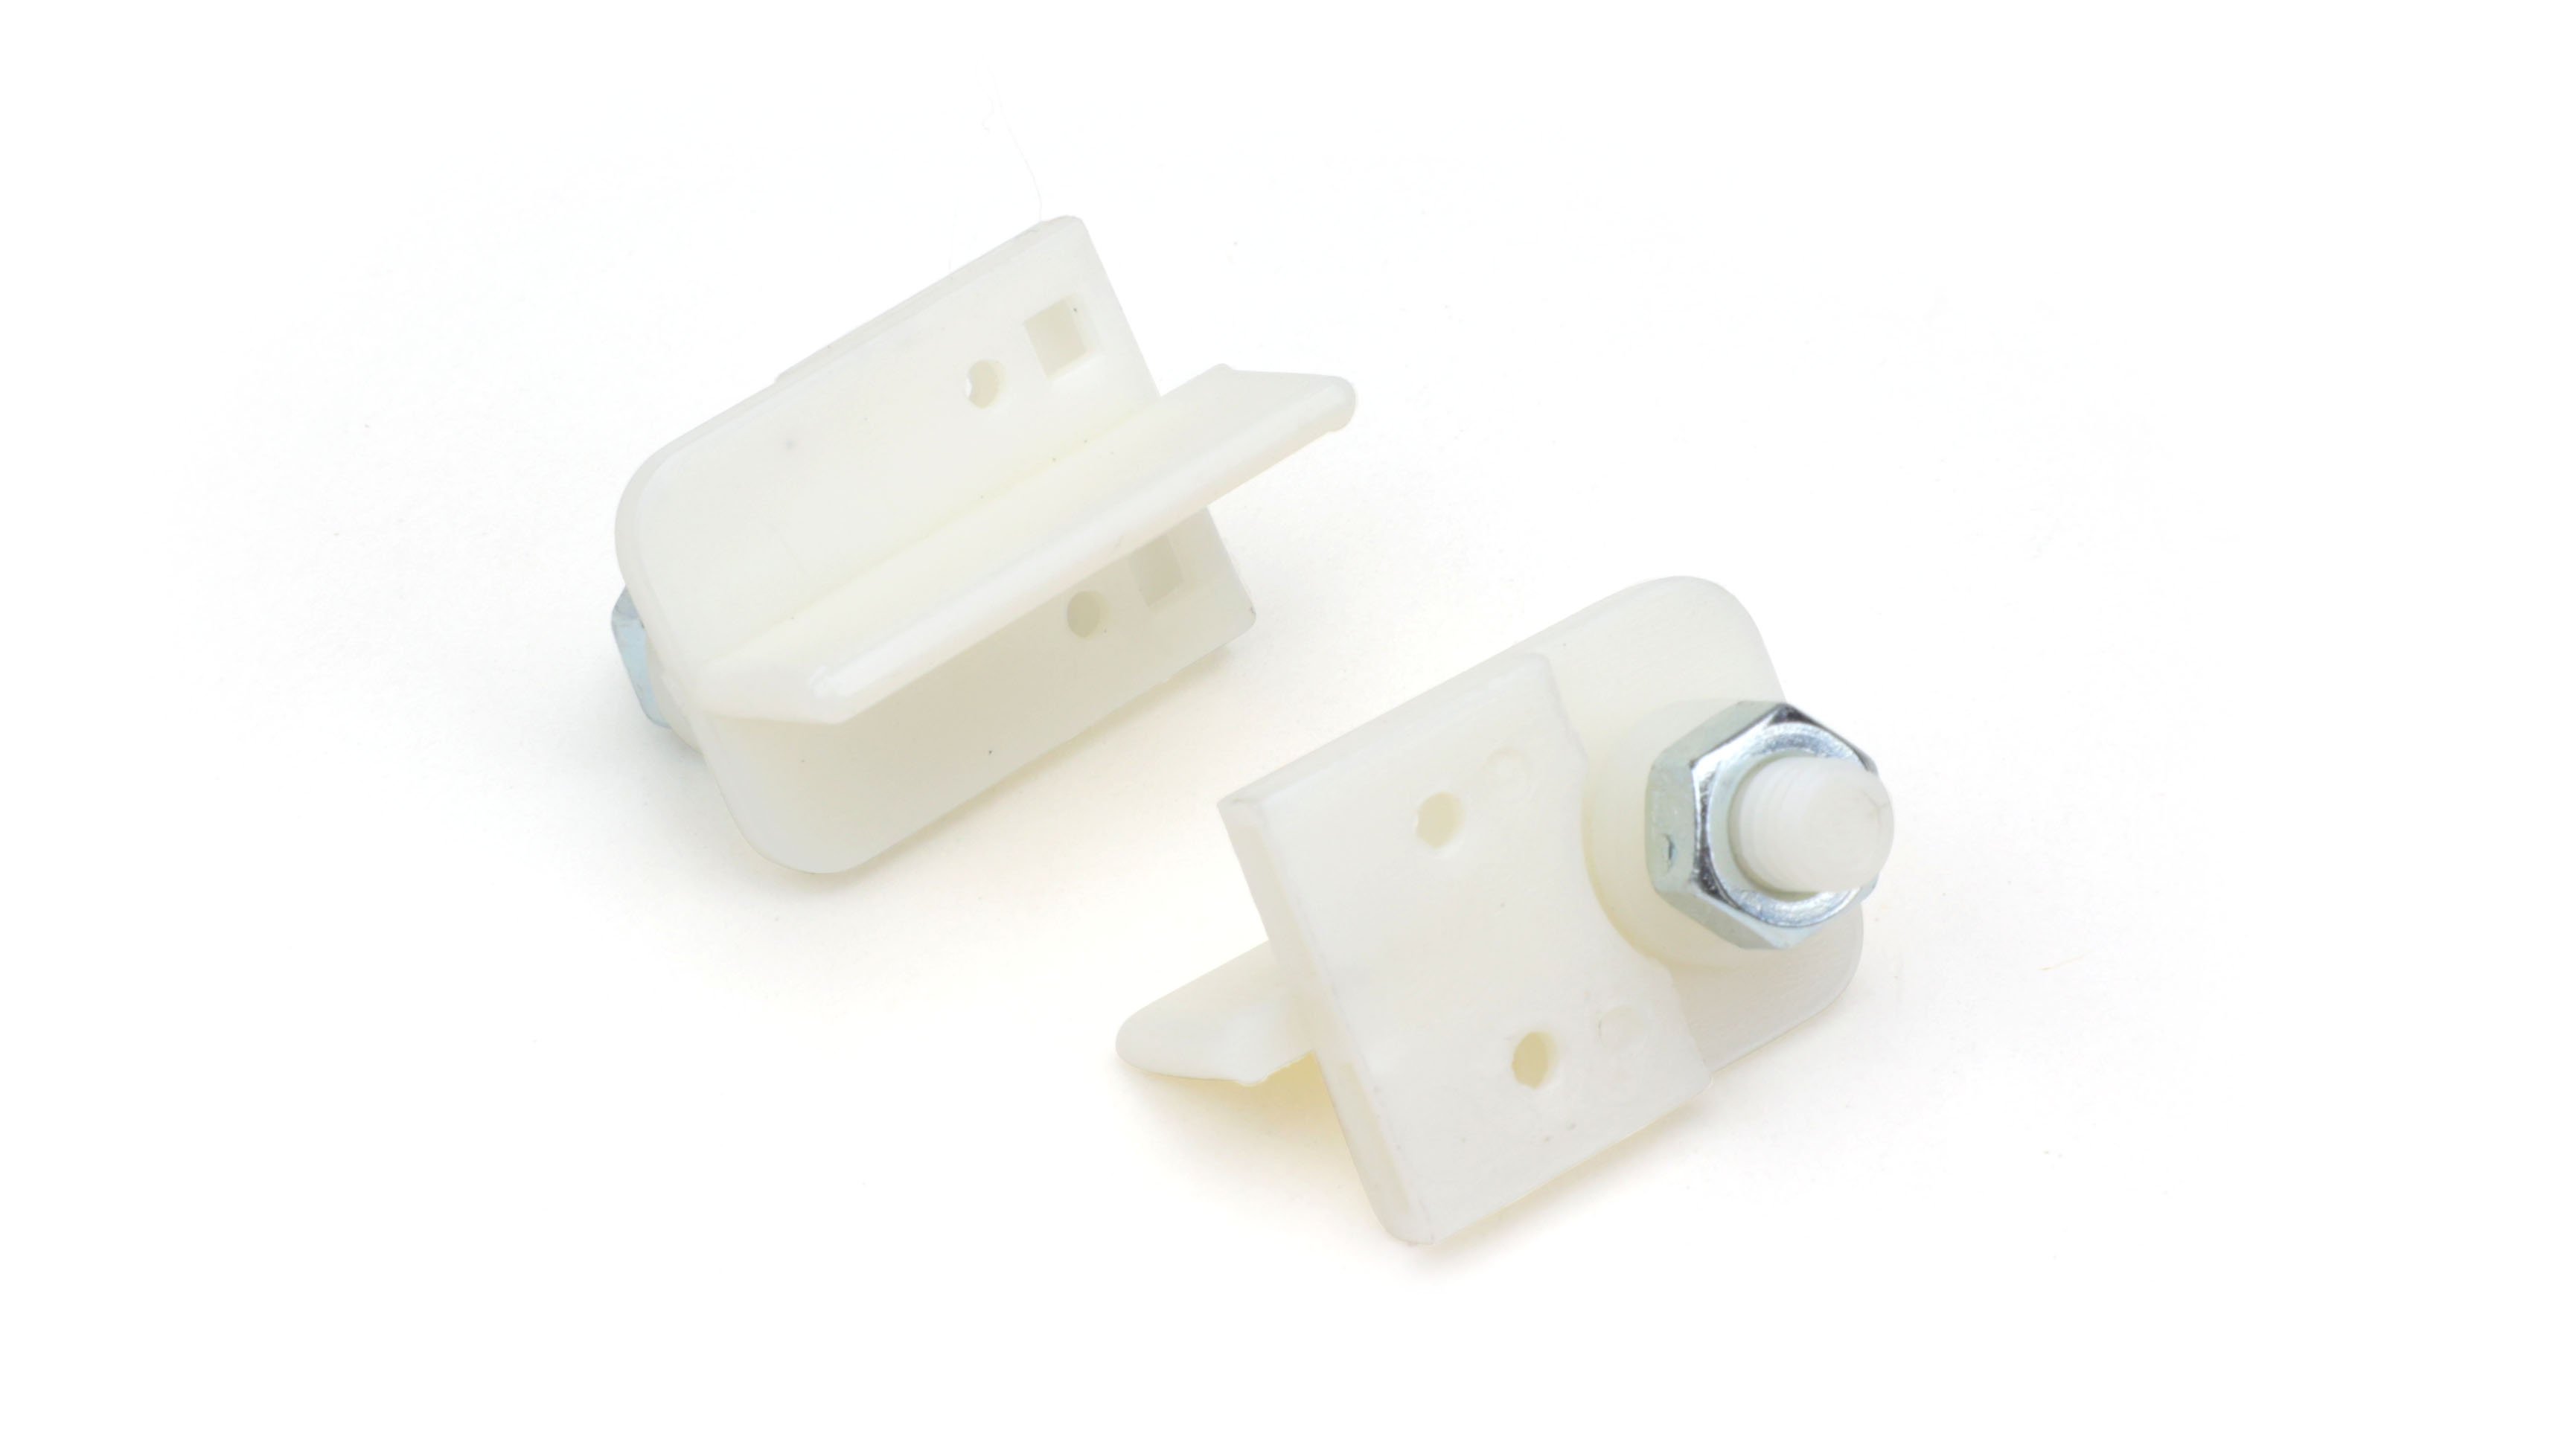 H&R HR604 - 1/24 Guide - White w/ Washer & Nut - pair